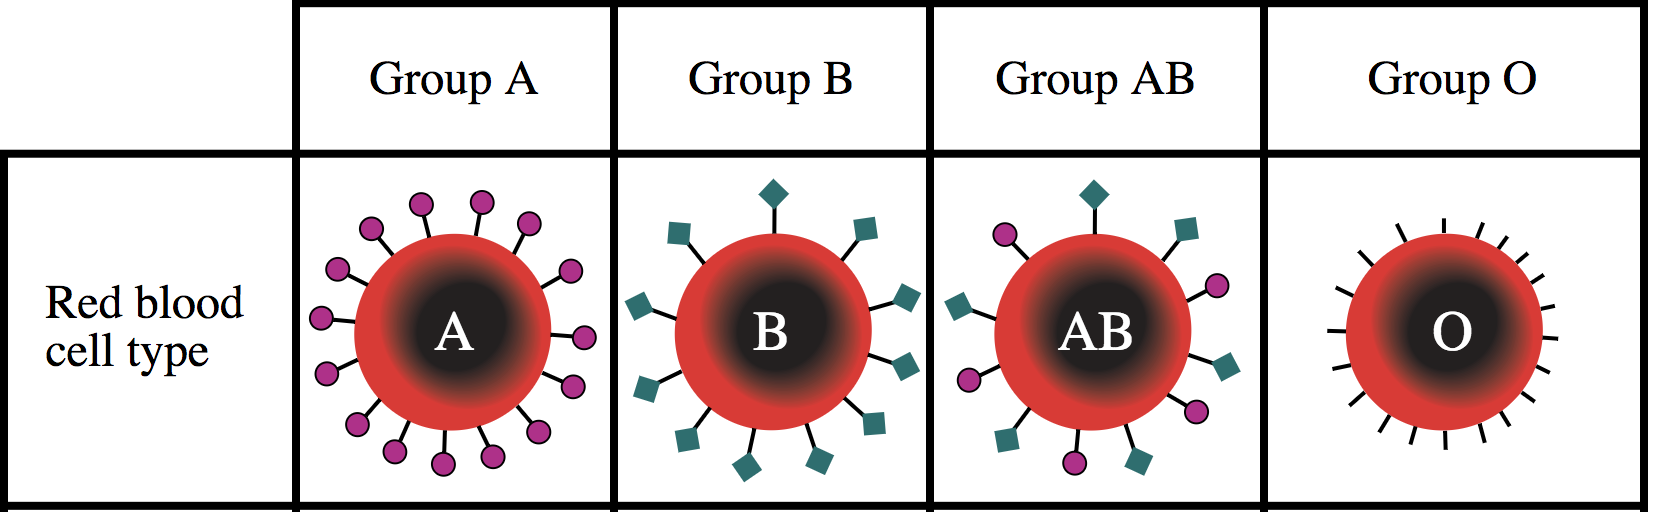 Diagram of ABO blood groups: A with circle antigens, B with square antigens, AB with circle and square antigens, O with no antigens